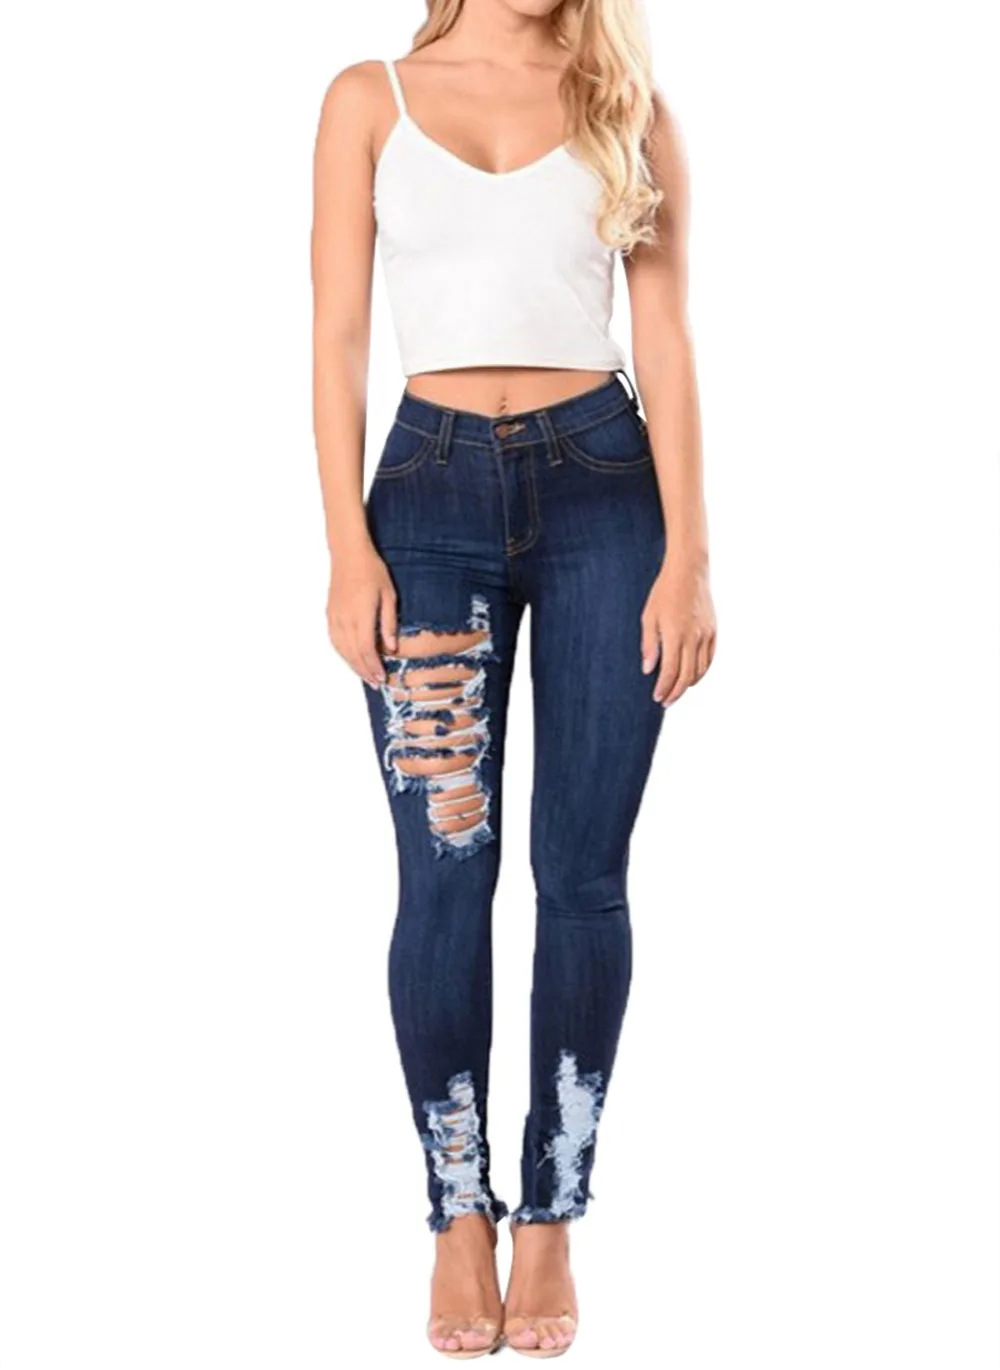 Ripped Distressed Jeans Womens Cute Stretch Skinny Pants Classic Slim